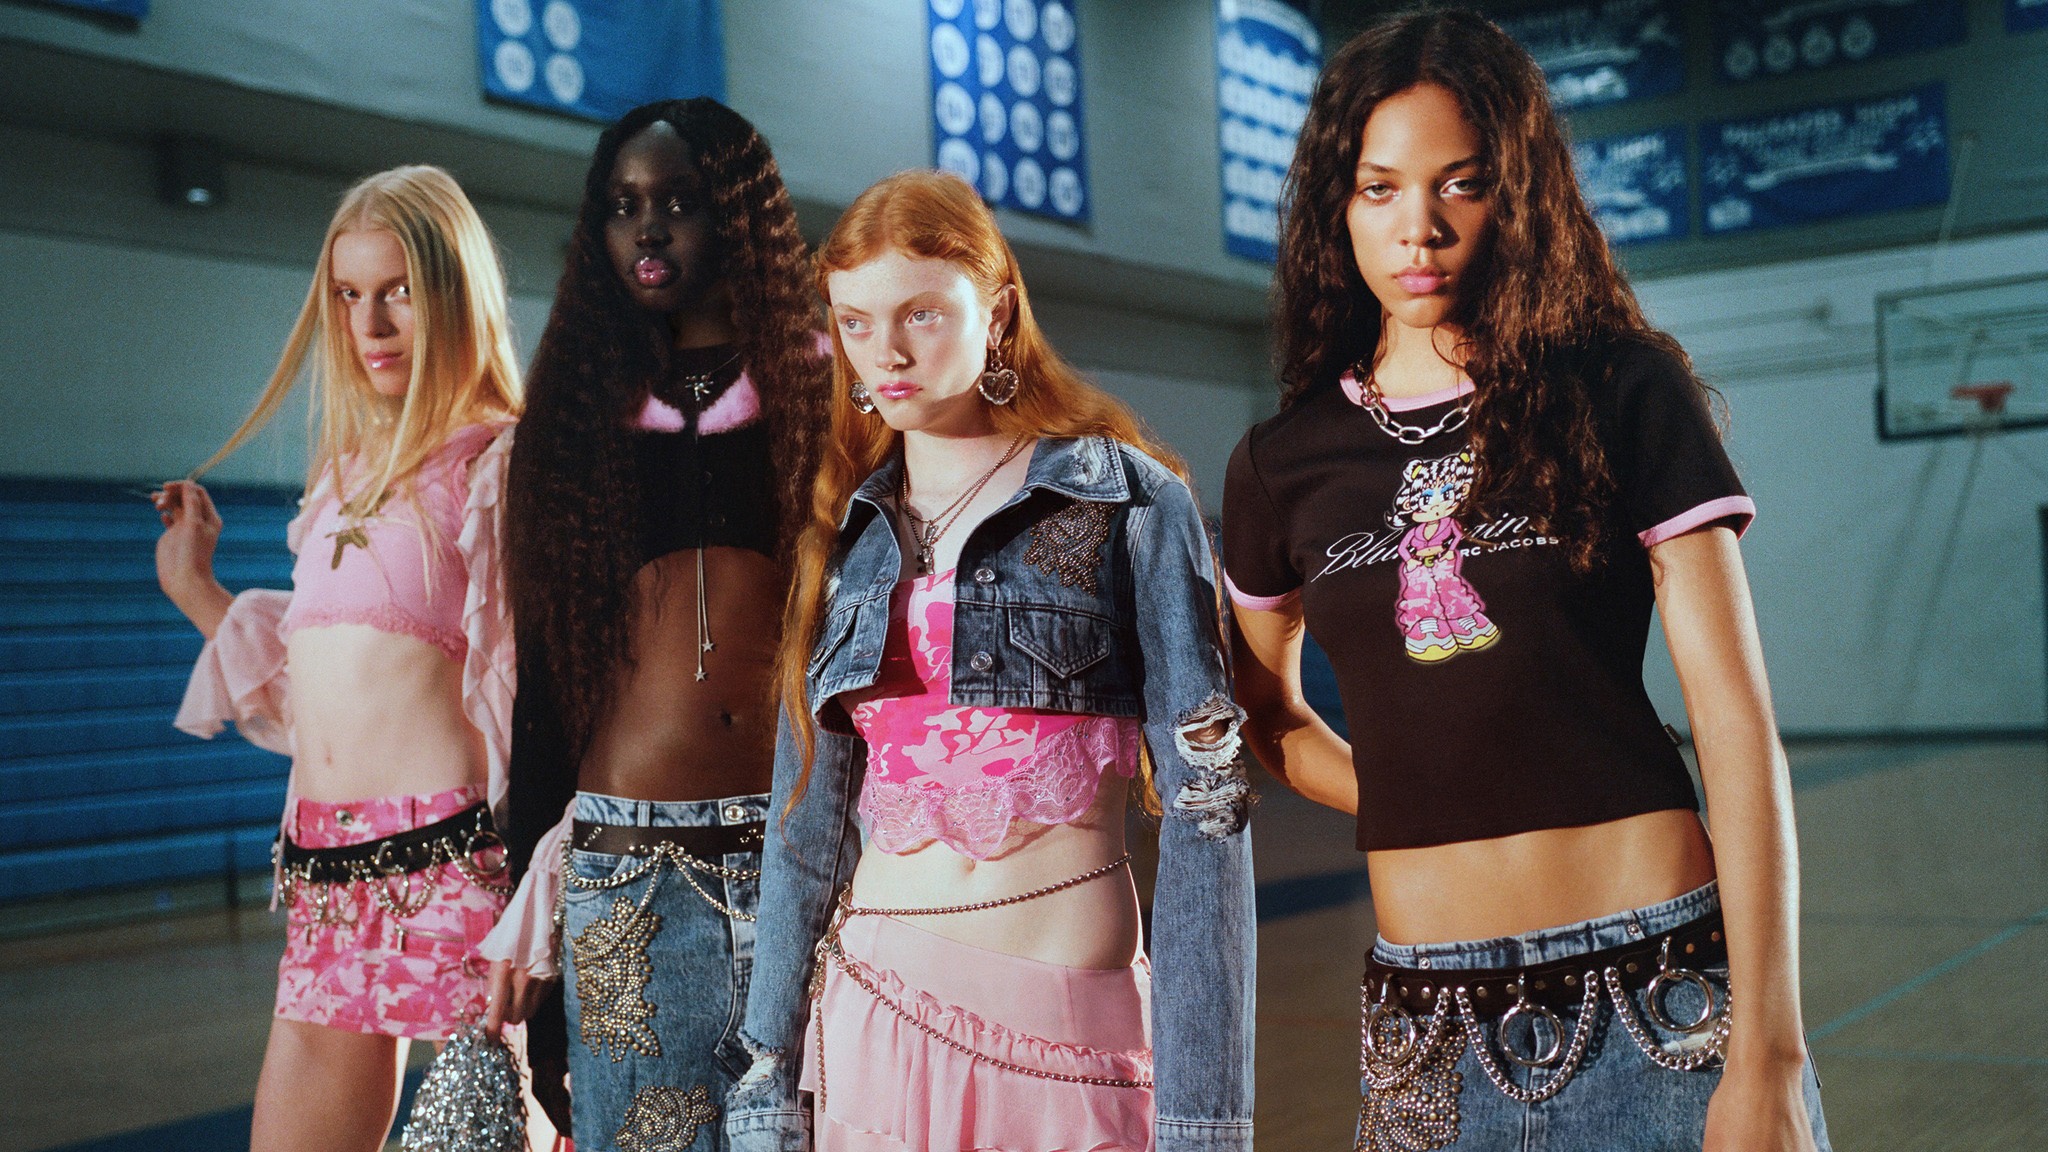 Brands like Blumarine and Lanvin are leaning on the nostalgia of past hits. But connecting with new consumers means more than just relying on old favorites. Photo: Blumarine